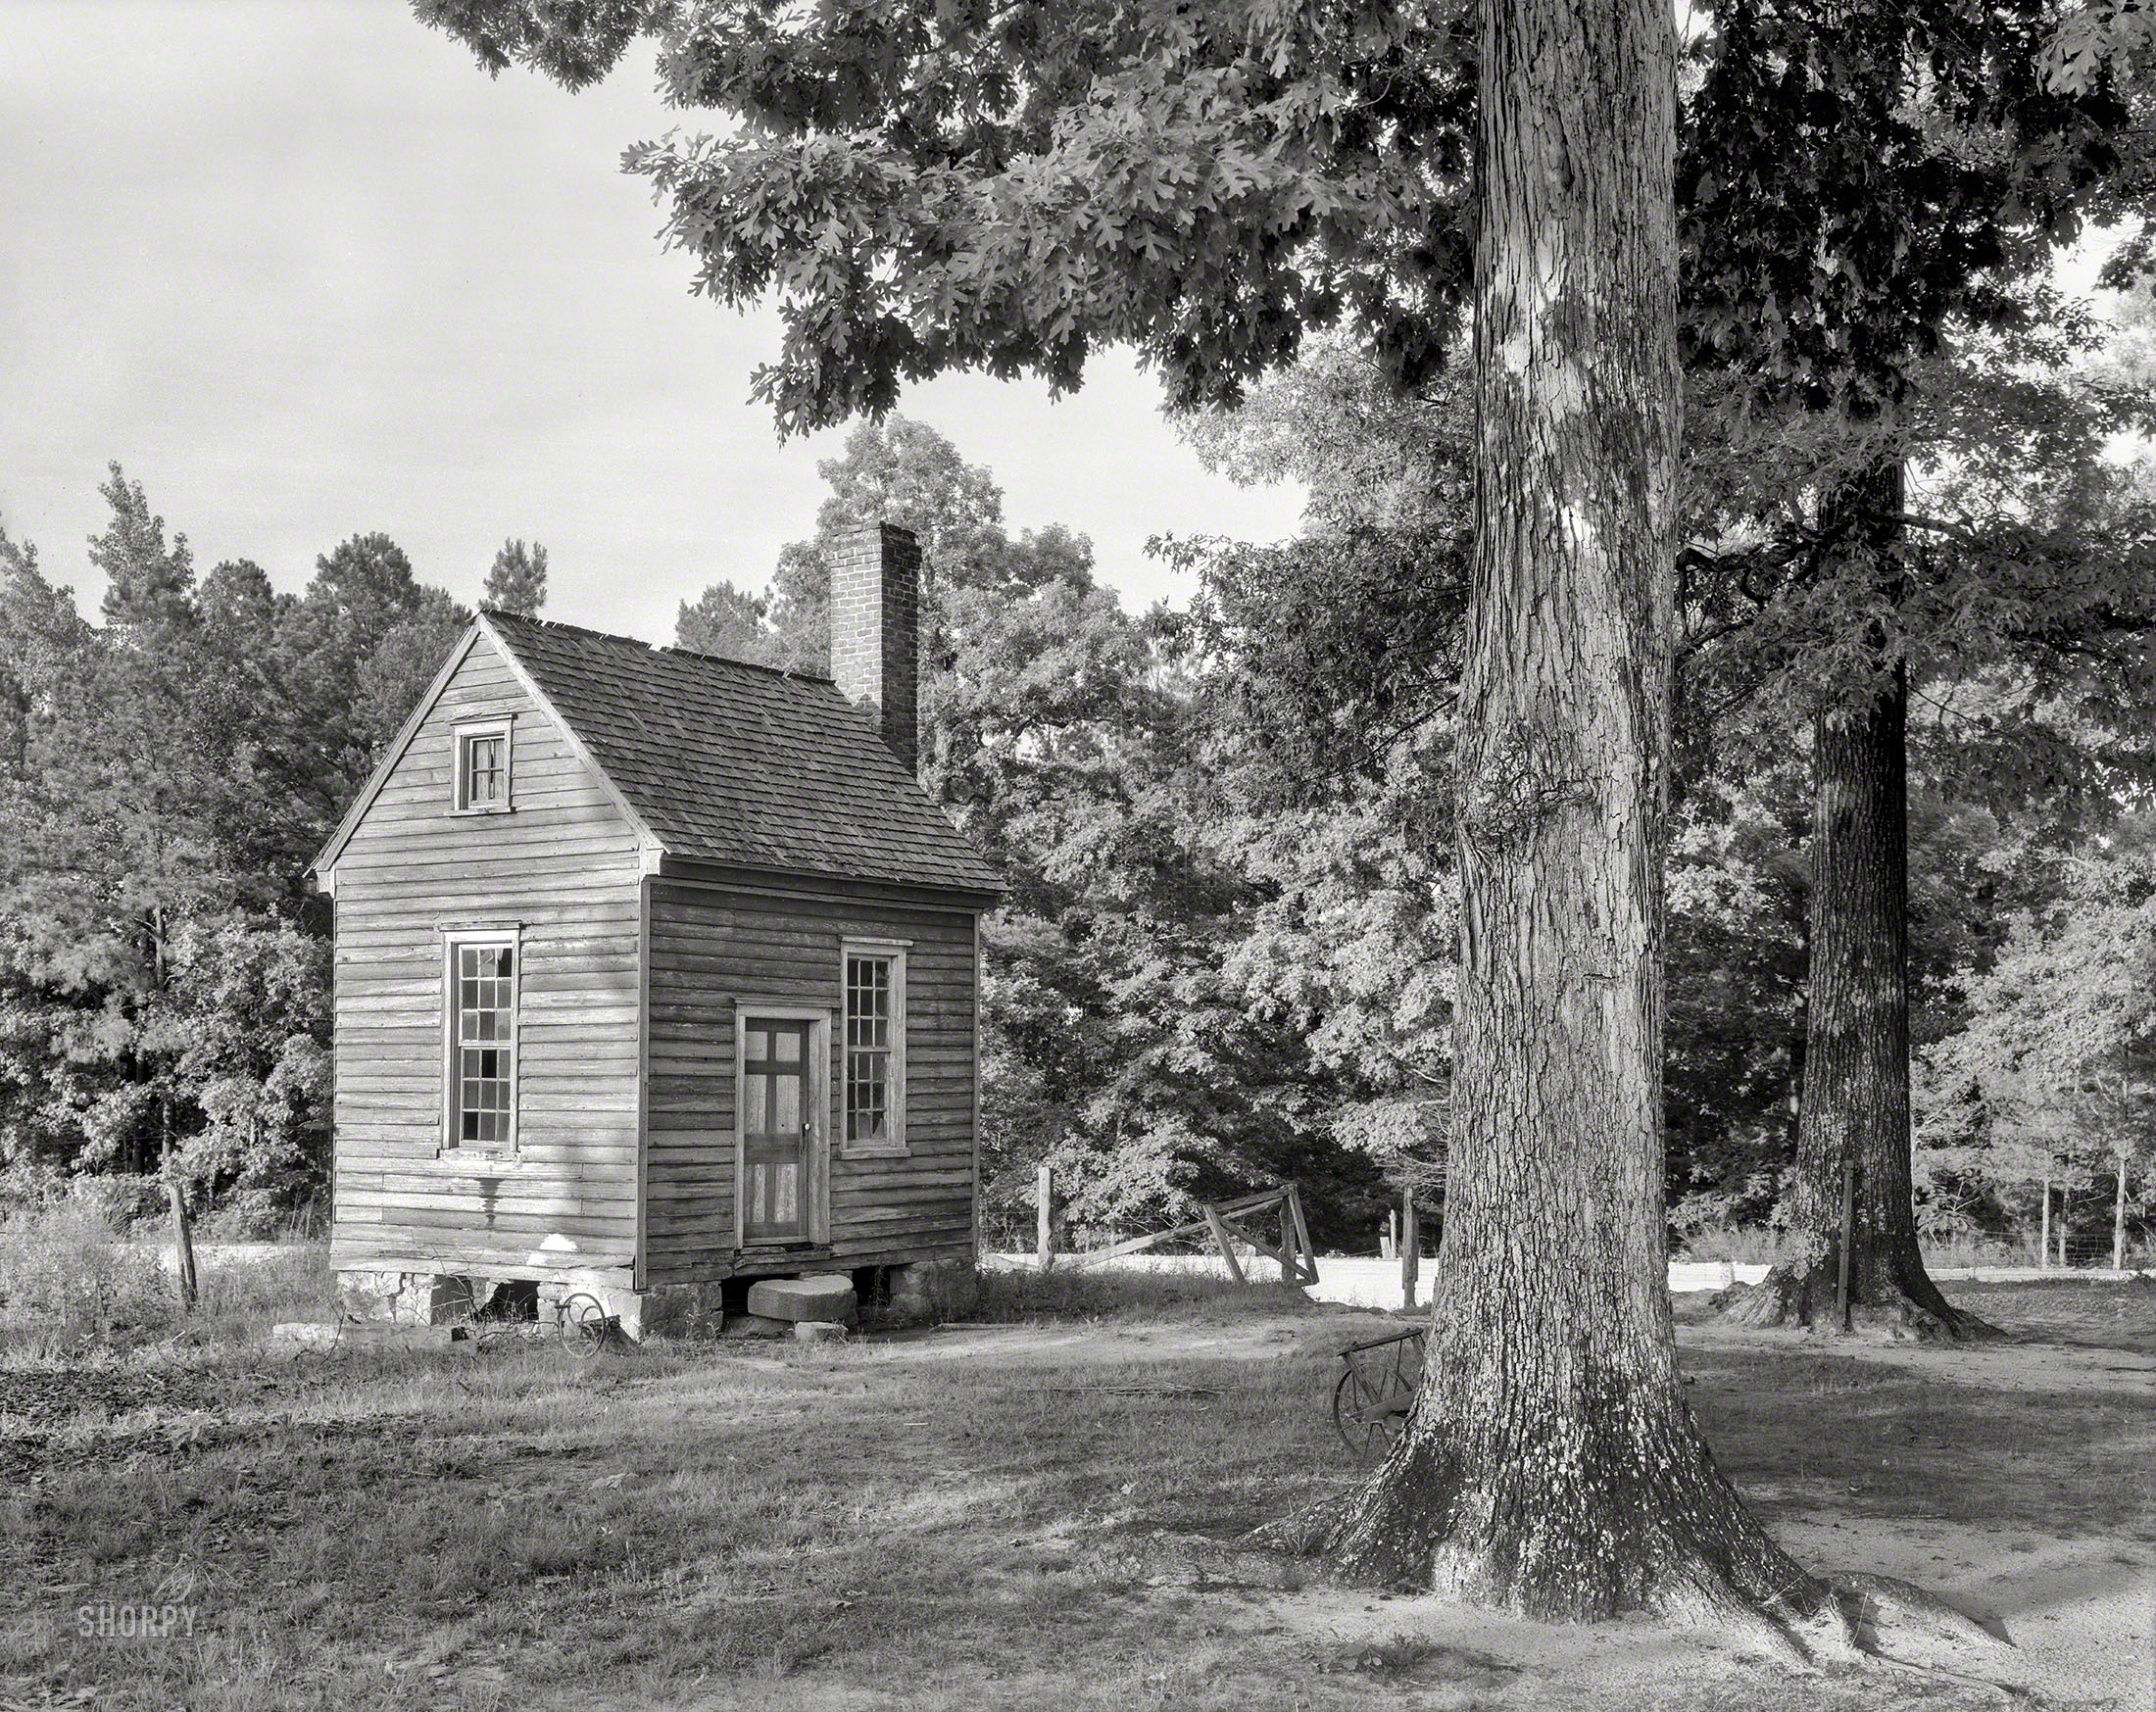 1938. "Traveller's Rest, Louisburg vicinity, Franklin County, North Carolina. Farm of A.T. Wilson; a roadside guest house." 8x10 inch acetate negative by Frances Benjamin Johnston. View full size.